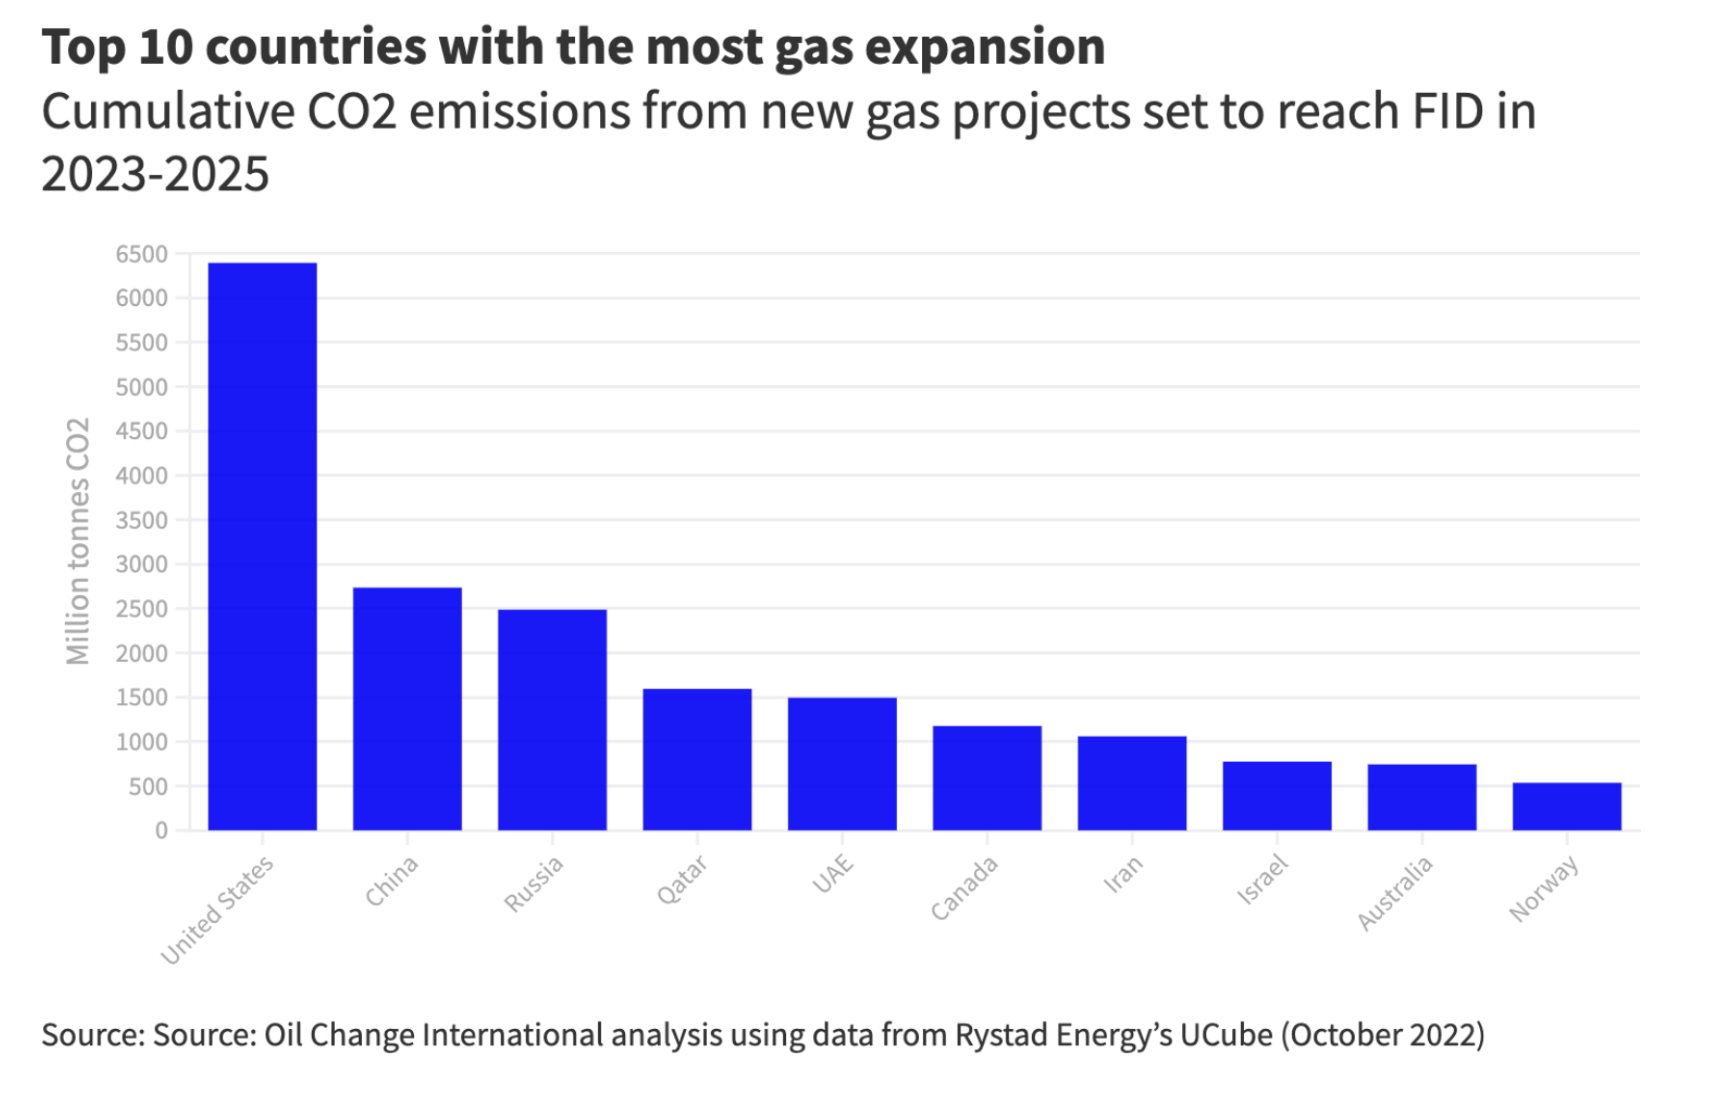 Top 10 countries with the most gas expansion. This graph shows the cumulative CO2 emissions from new gas projects set to reach FID in 2023-2025.